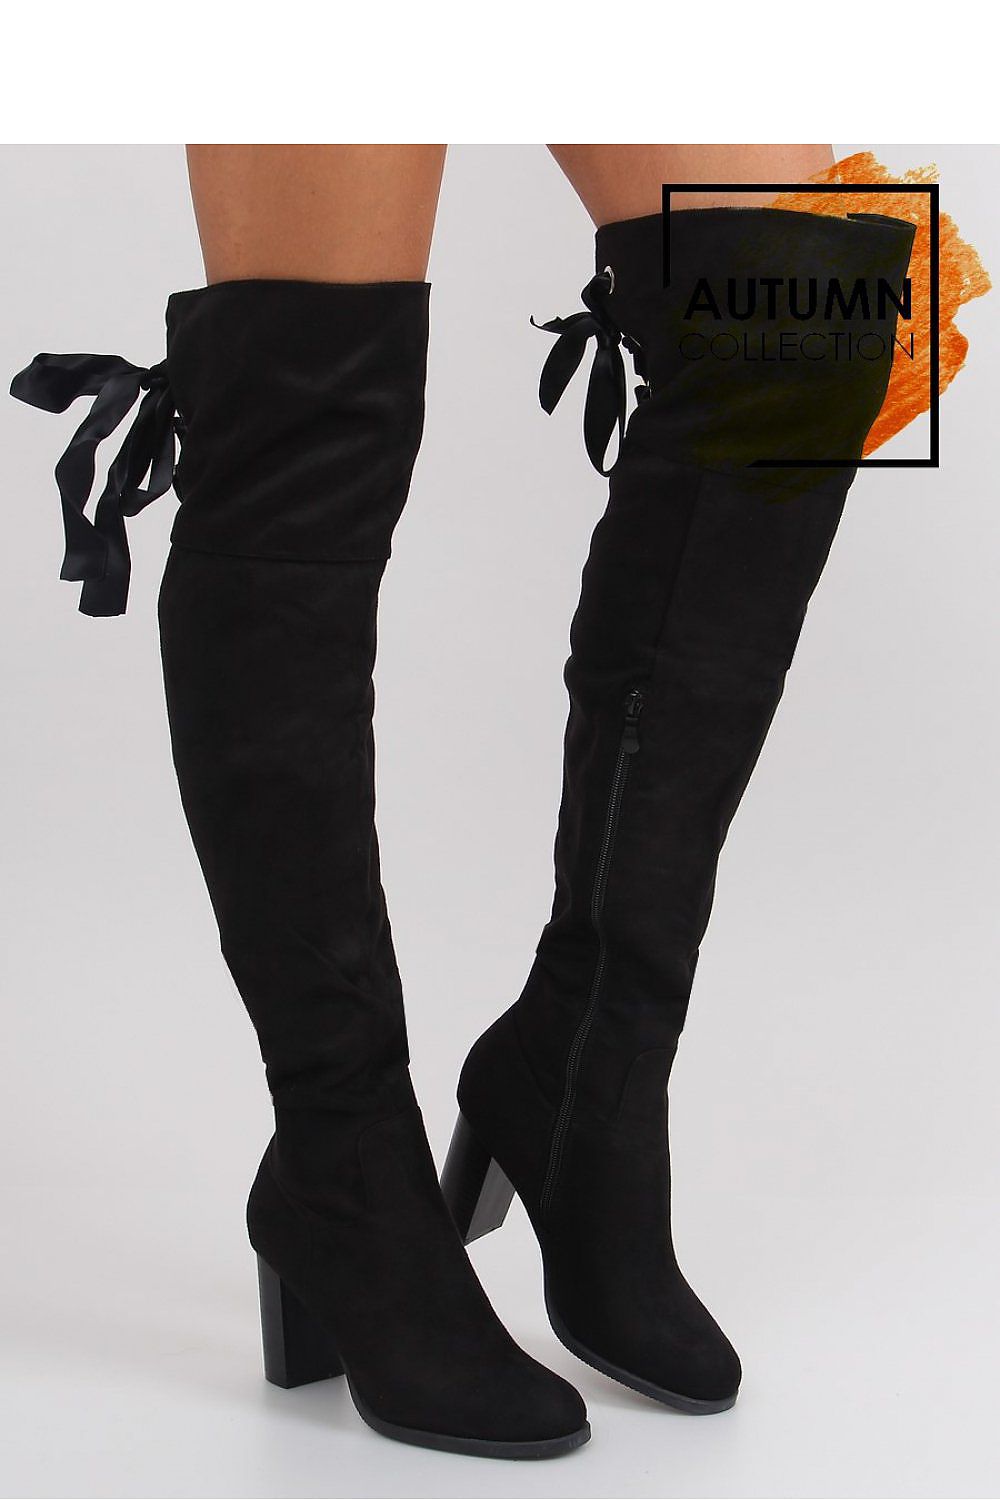 RF ROOM OF FASHION Womens Over The Knee Block Chunky Heel Stretch Boots Medium and Wide Calf 